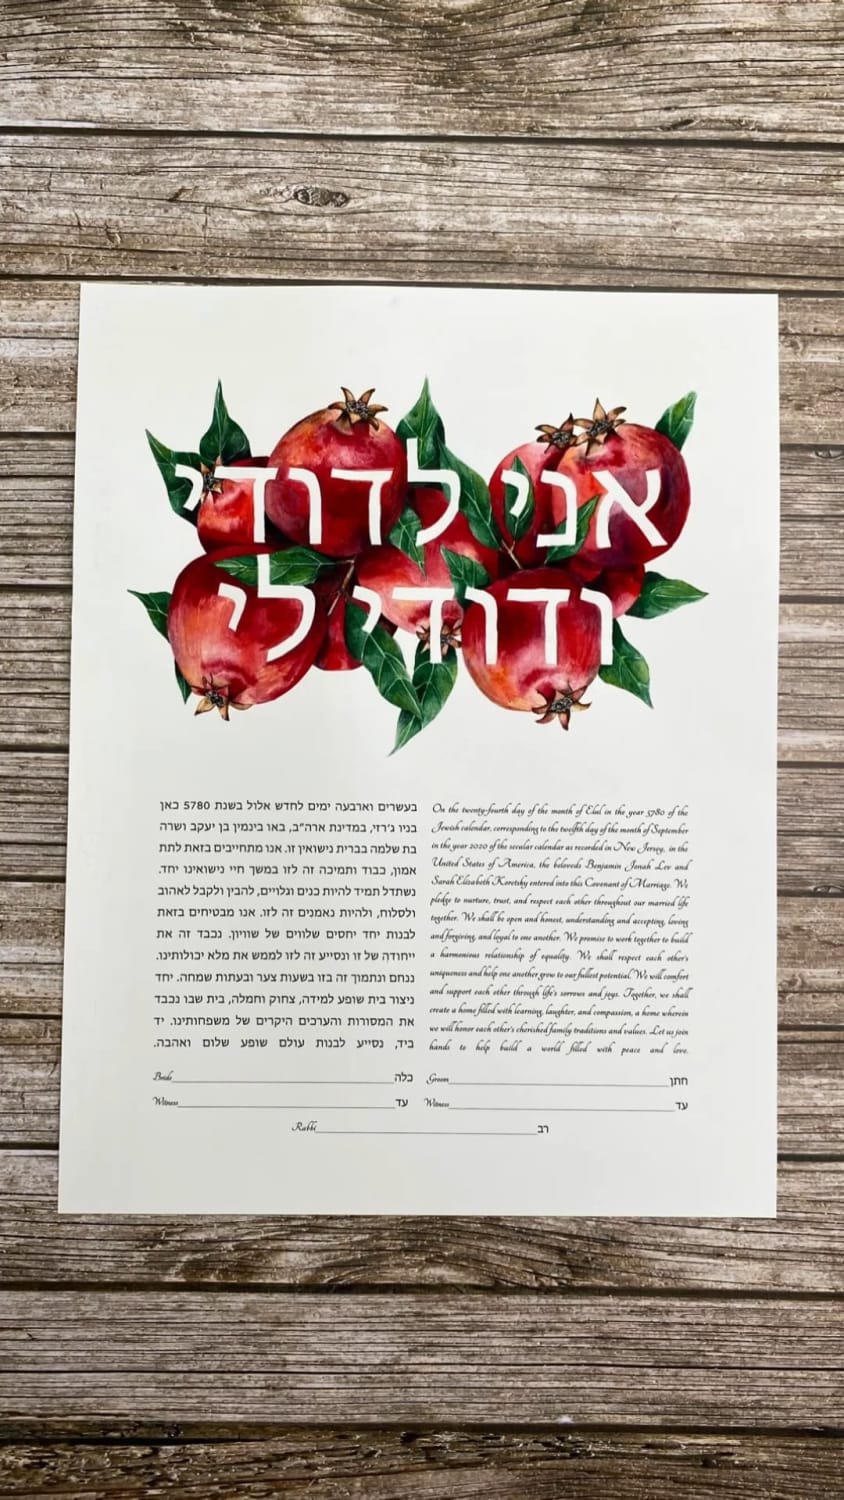 Painting a watercolor pomegranate ketubah (Jewish marriage certificate) with the Hebrew words “I am my beloved’s and my beloved is mine” ❤️